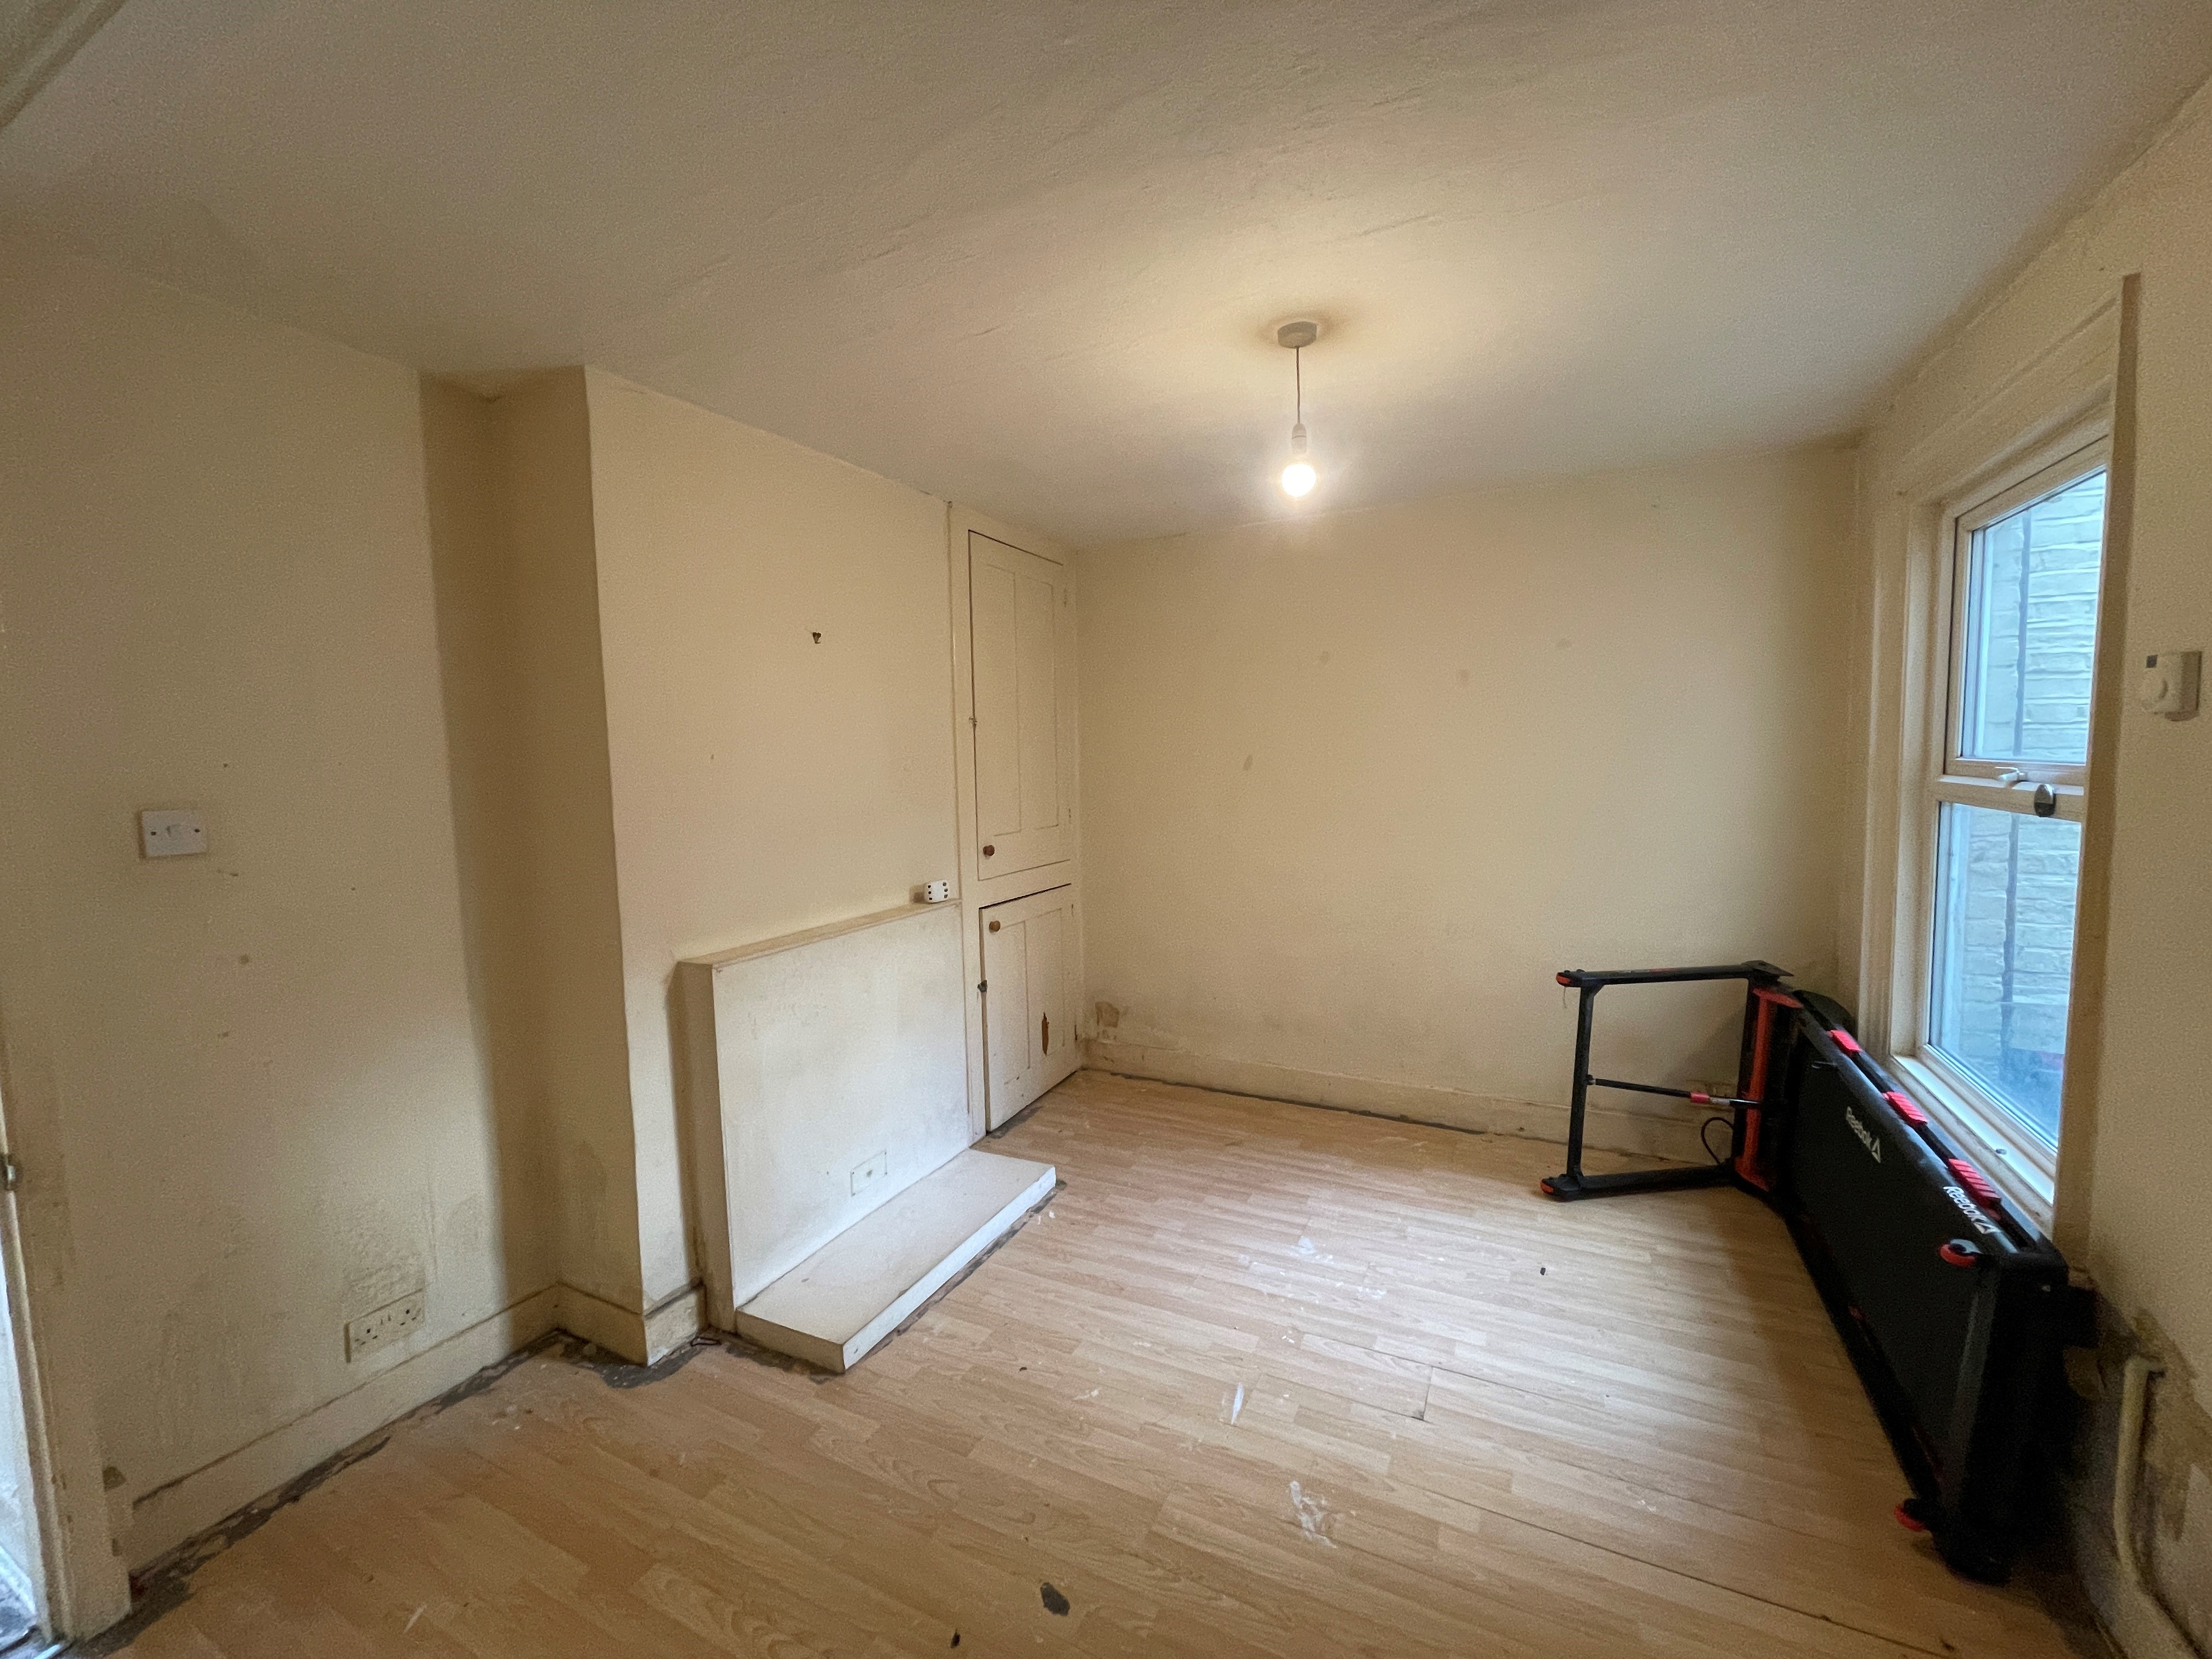 Lot: 92 - THREE-BEDROOM TERRACED HOUSE WITH VIEWS - Three piece bathroom suite